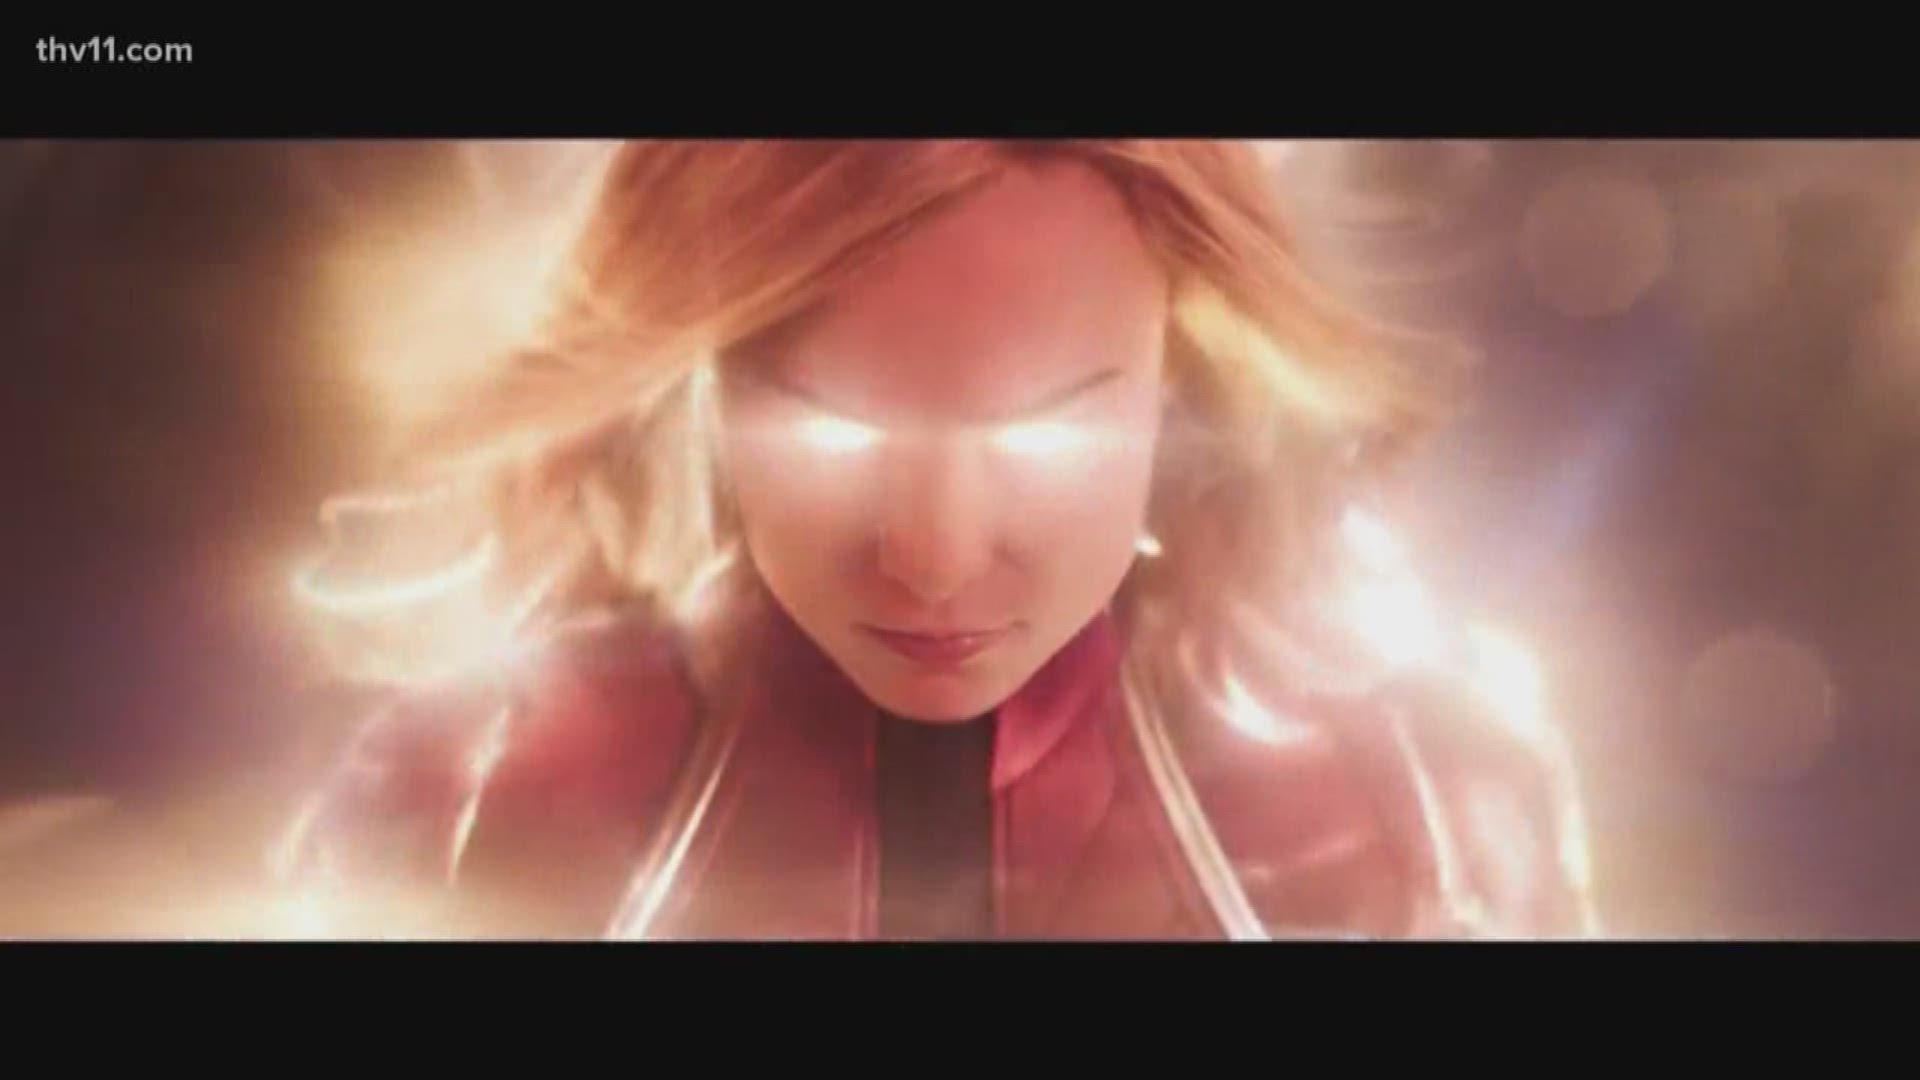 J.D. Roberts with Getting Reel is amping us as Captain Marvel hits theaters.